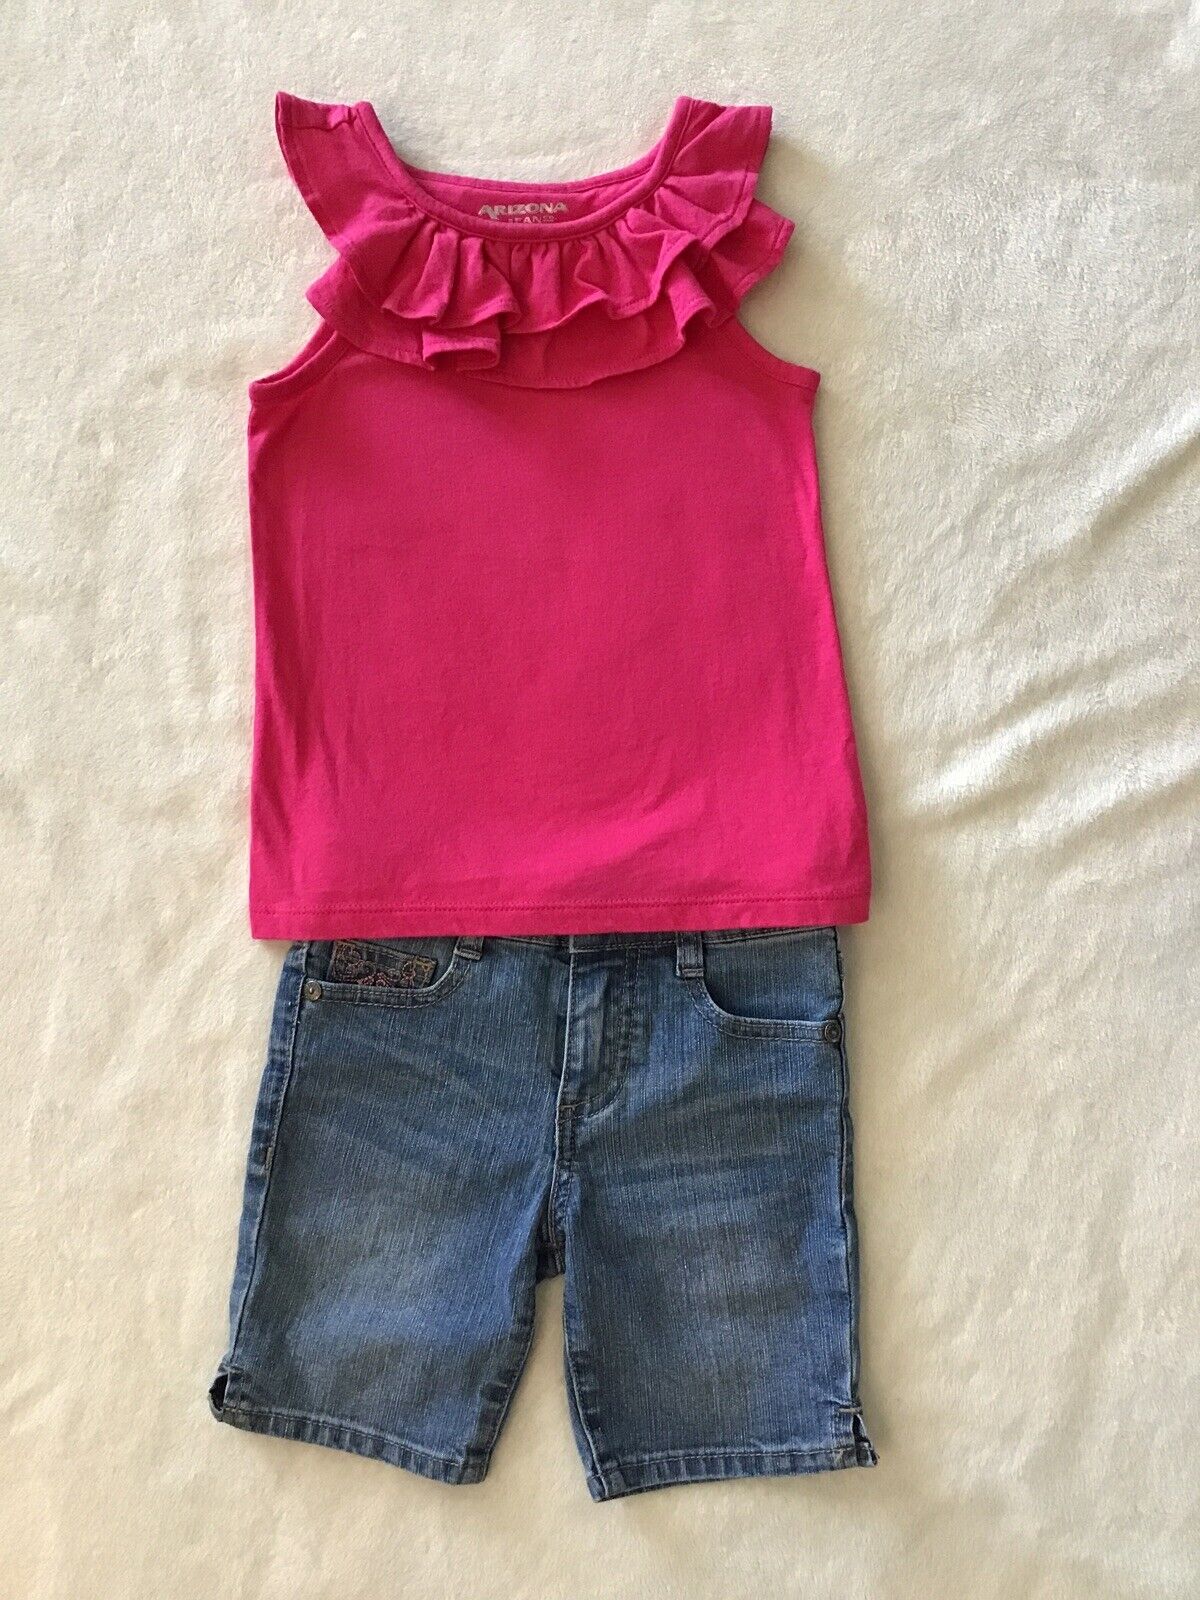 2-pc Girls Arizona Jeans Embellished Jean Shorts + Pink Ruffled Top ~ Size 4y